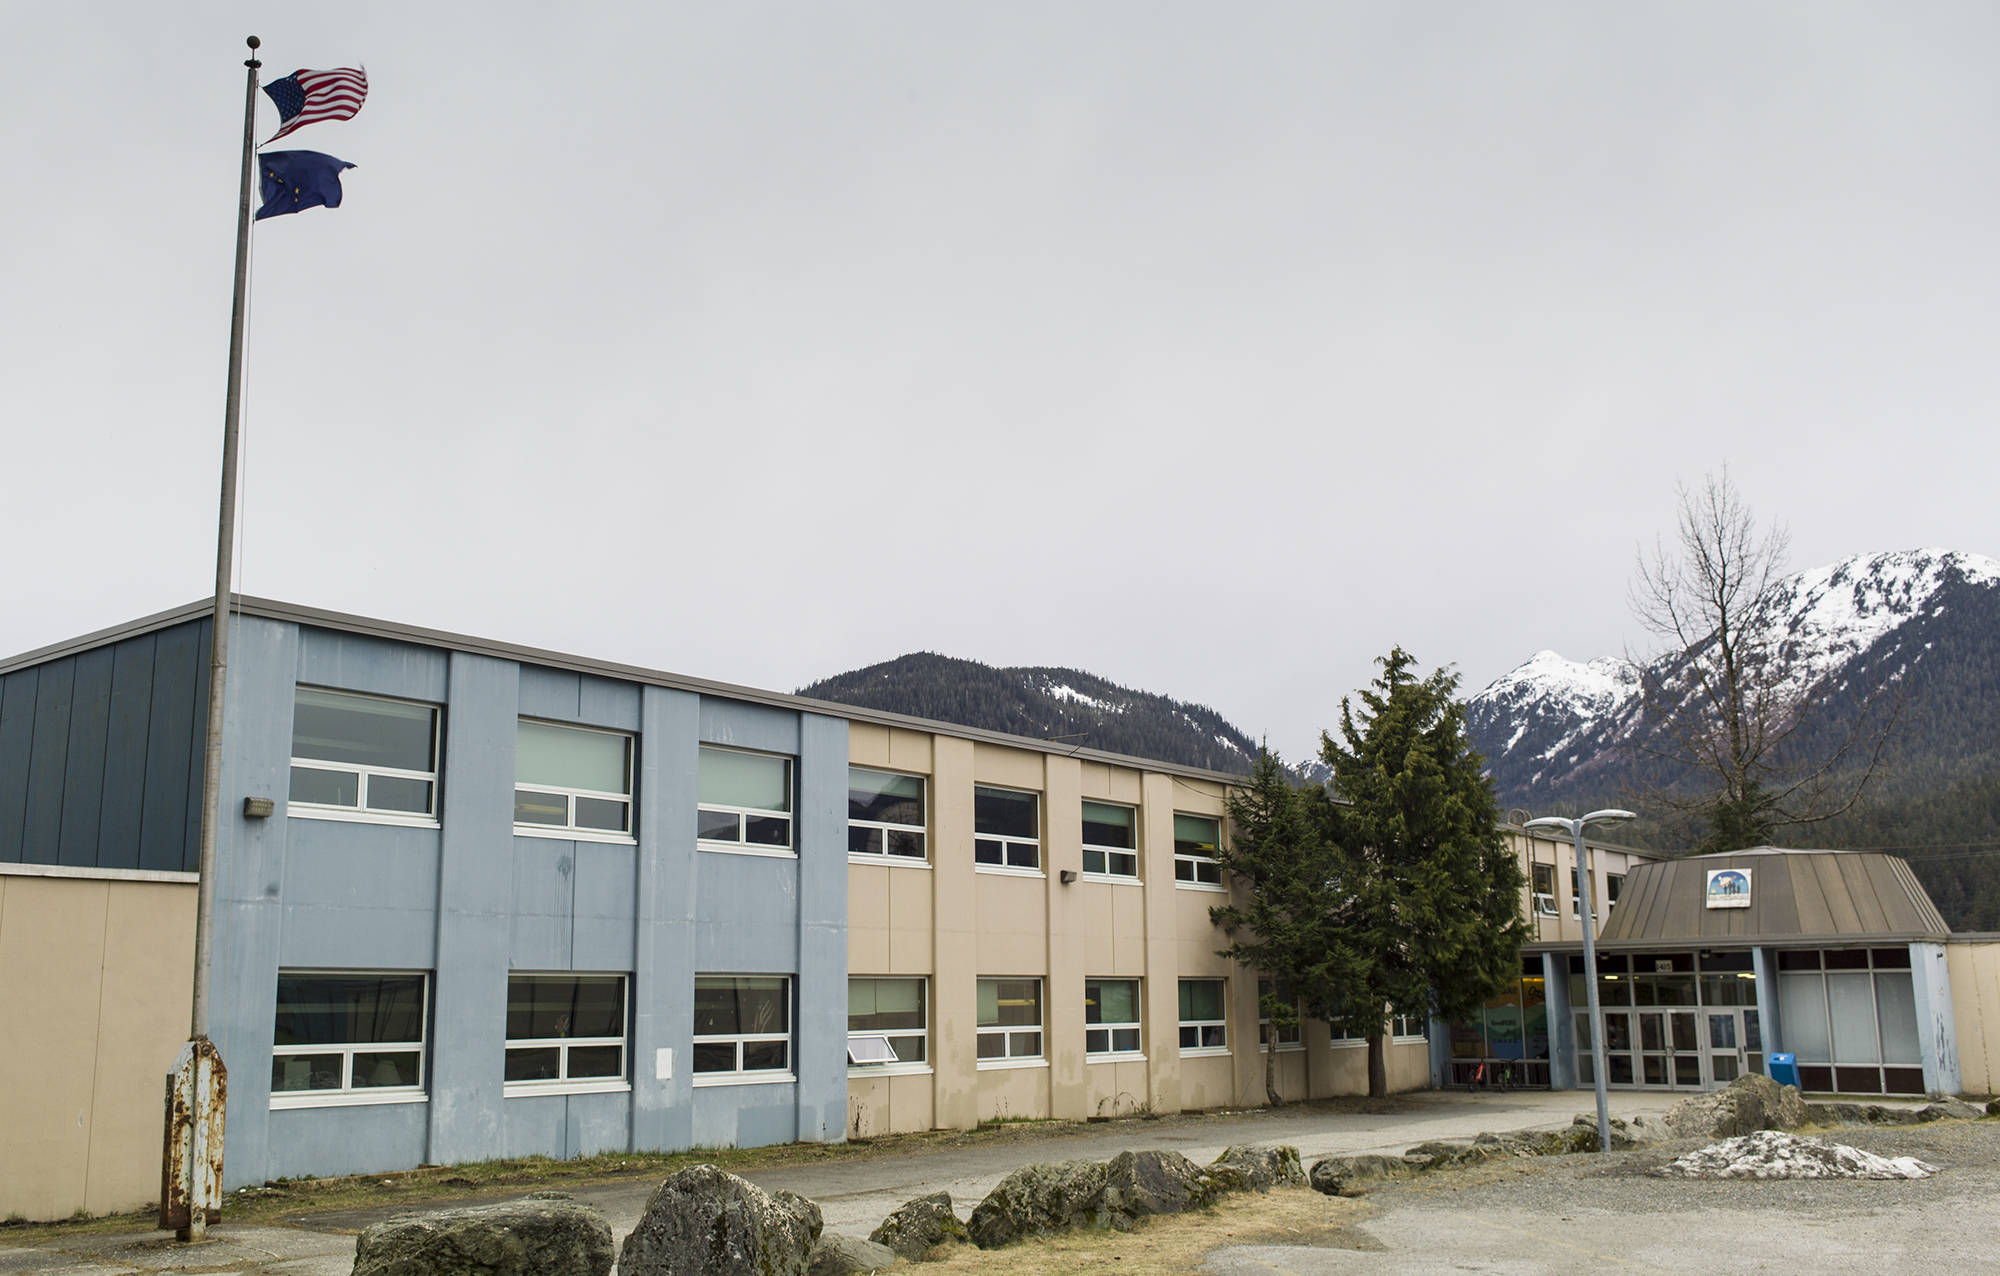 The Marie Drake Building is the Juneau school in the most need of an update. (Michael Penn | Juneau Empire)